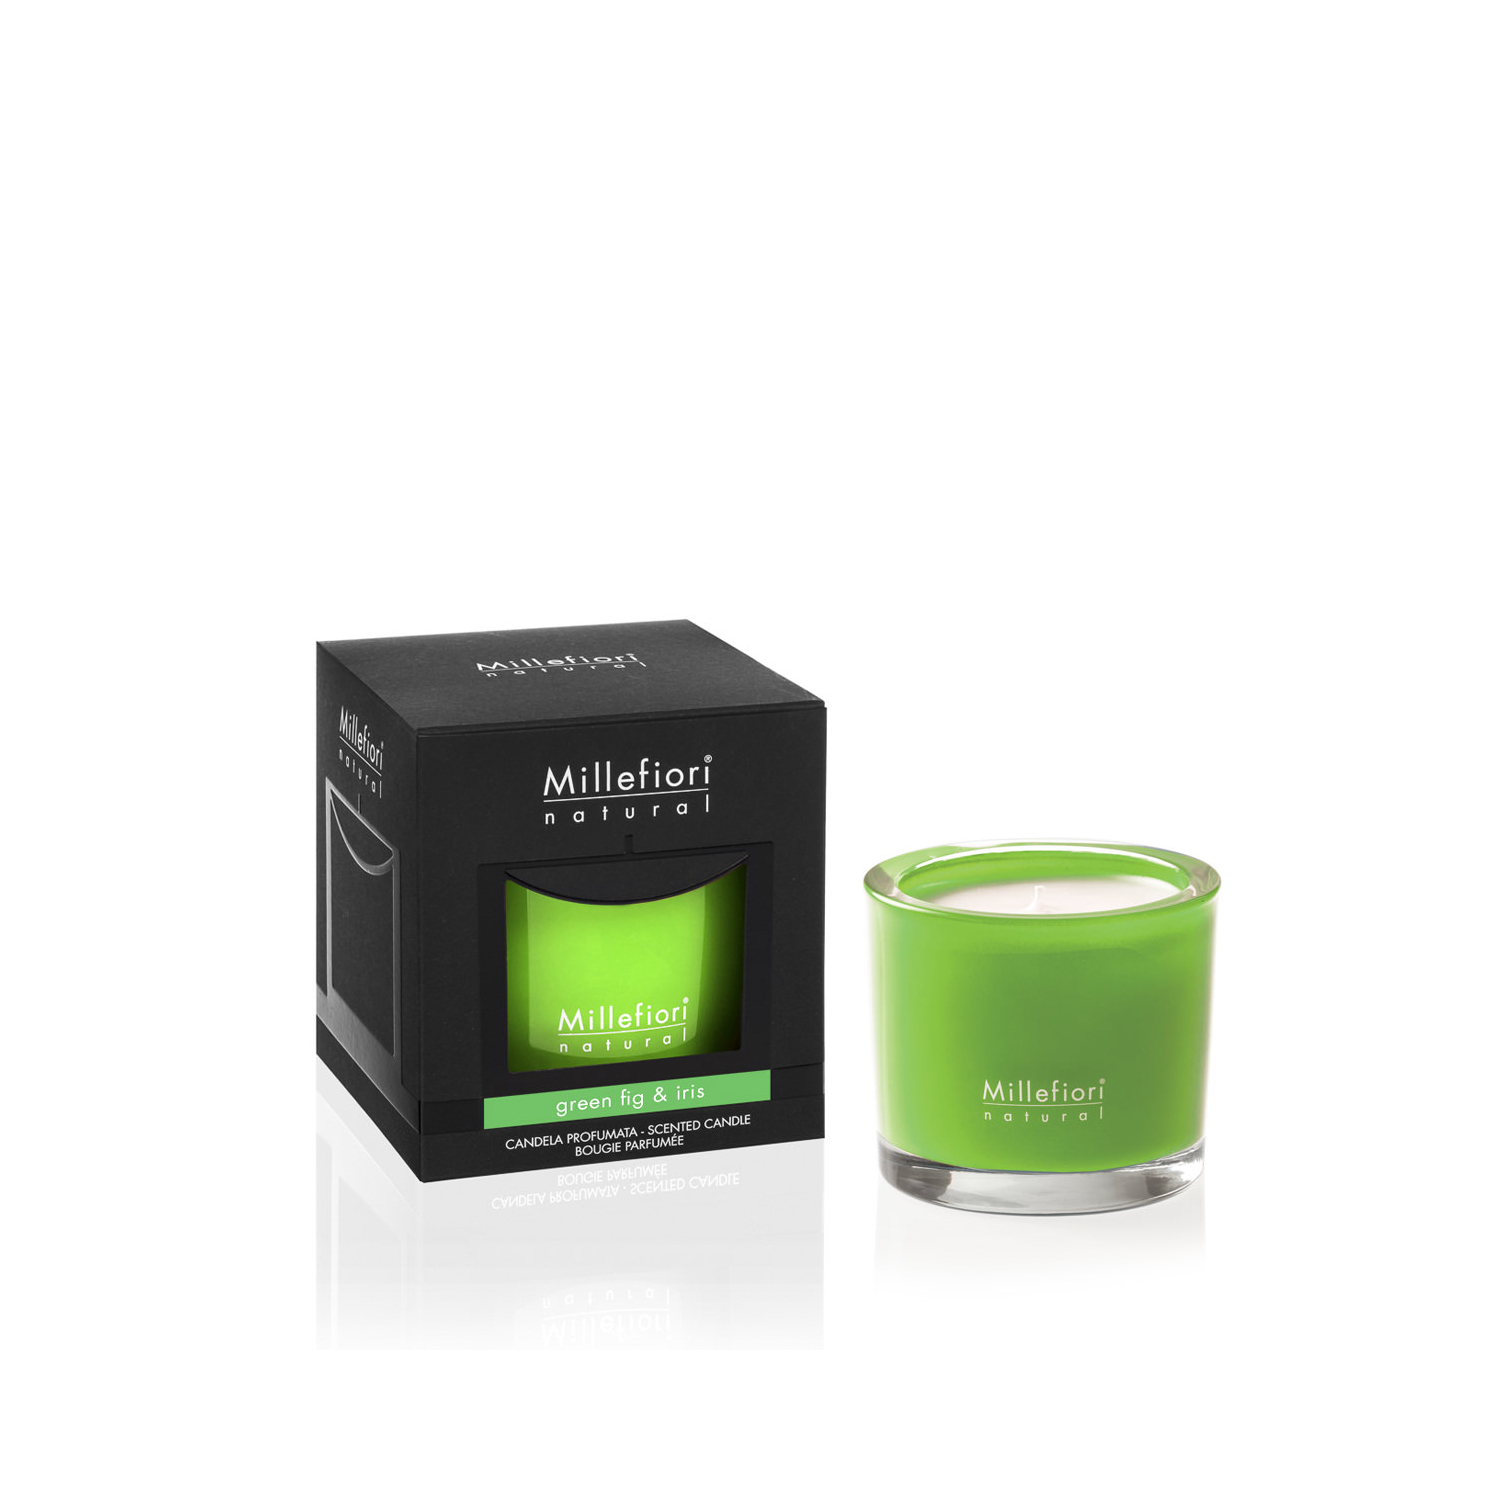 Green Fig & Iris Natural Scented Candle